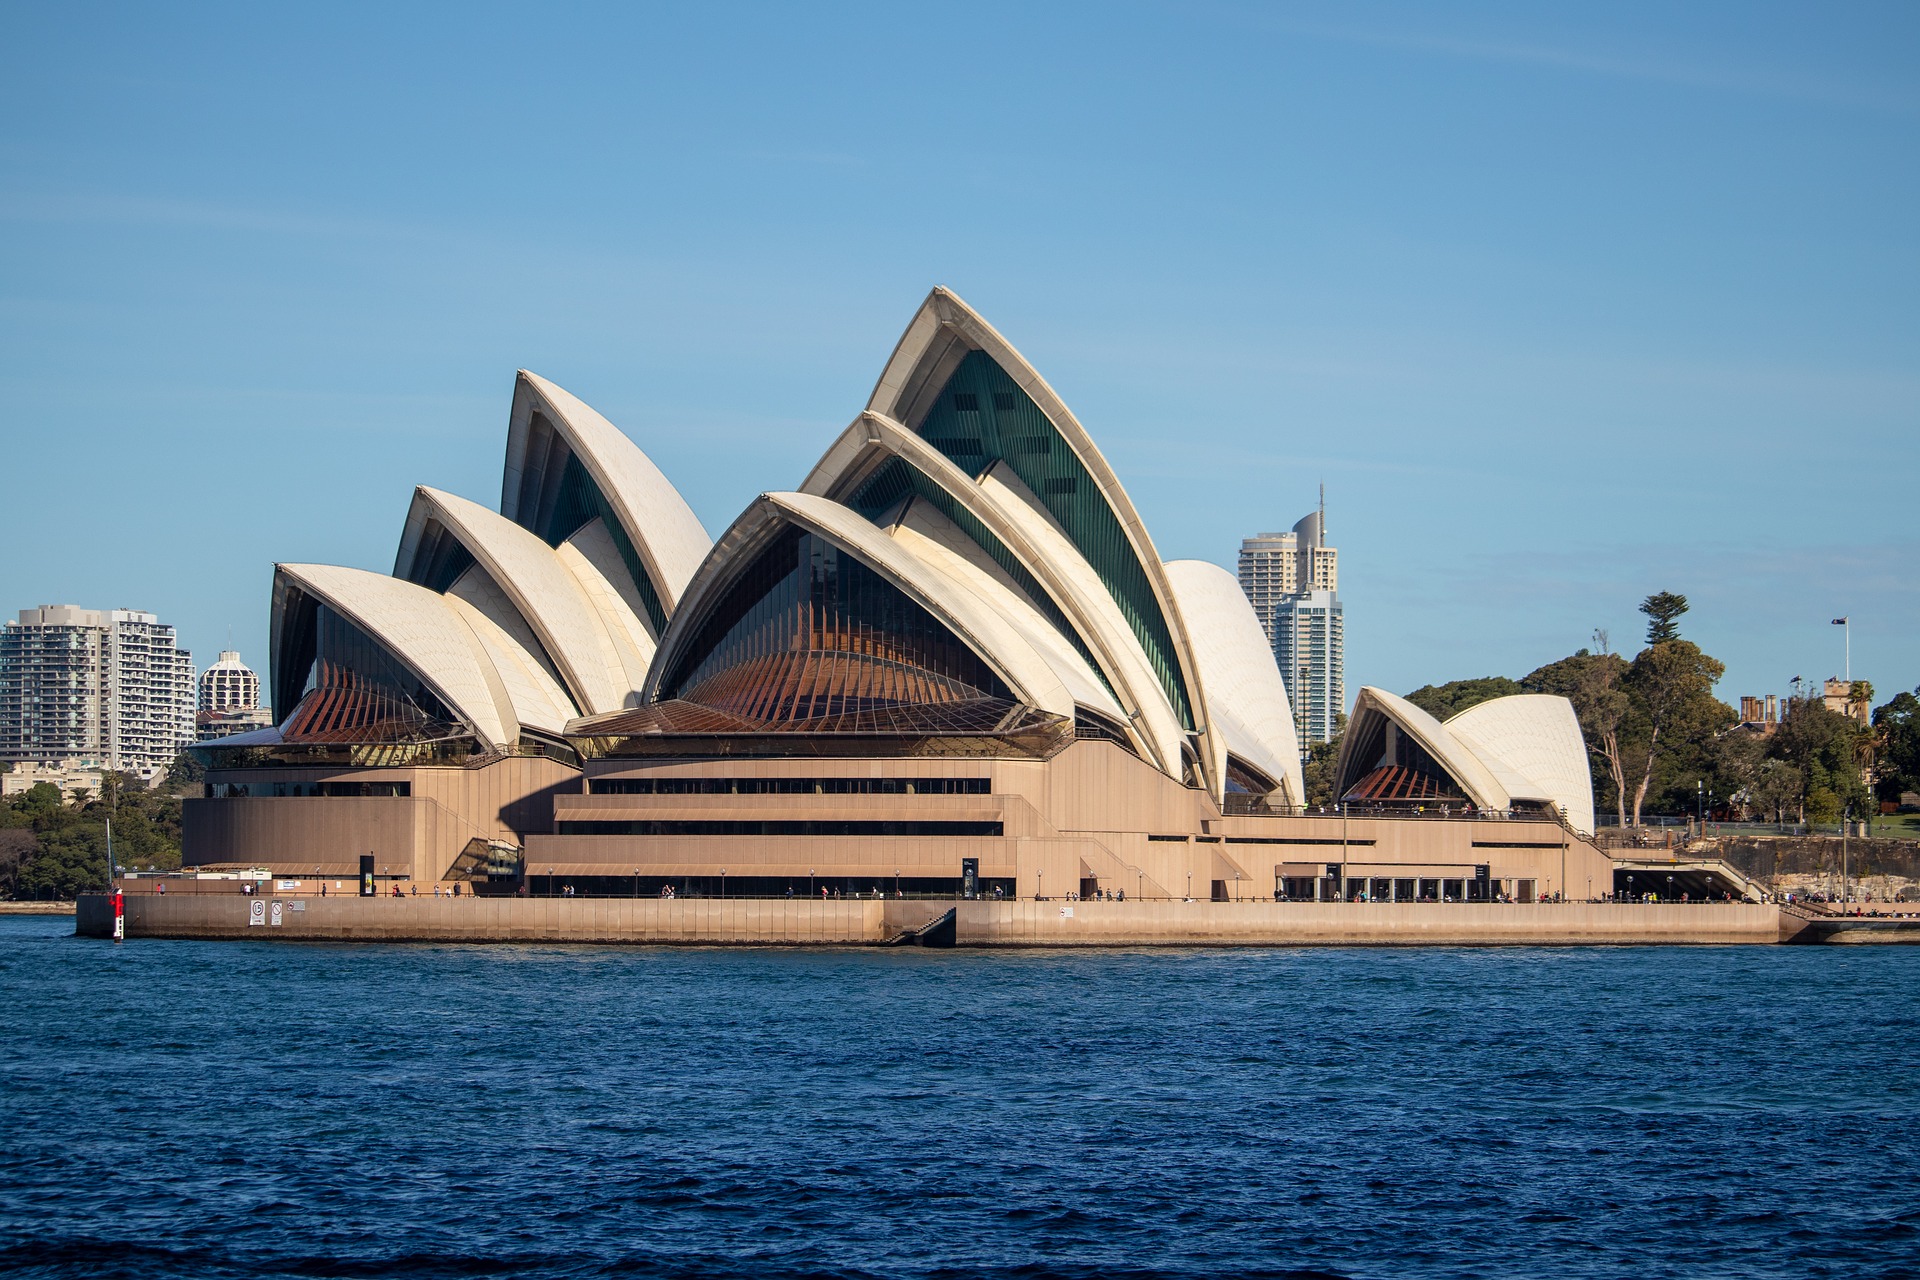 The Sydney Opera House showcases cool architecture.